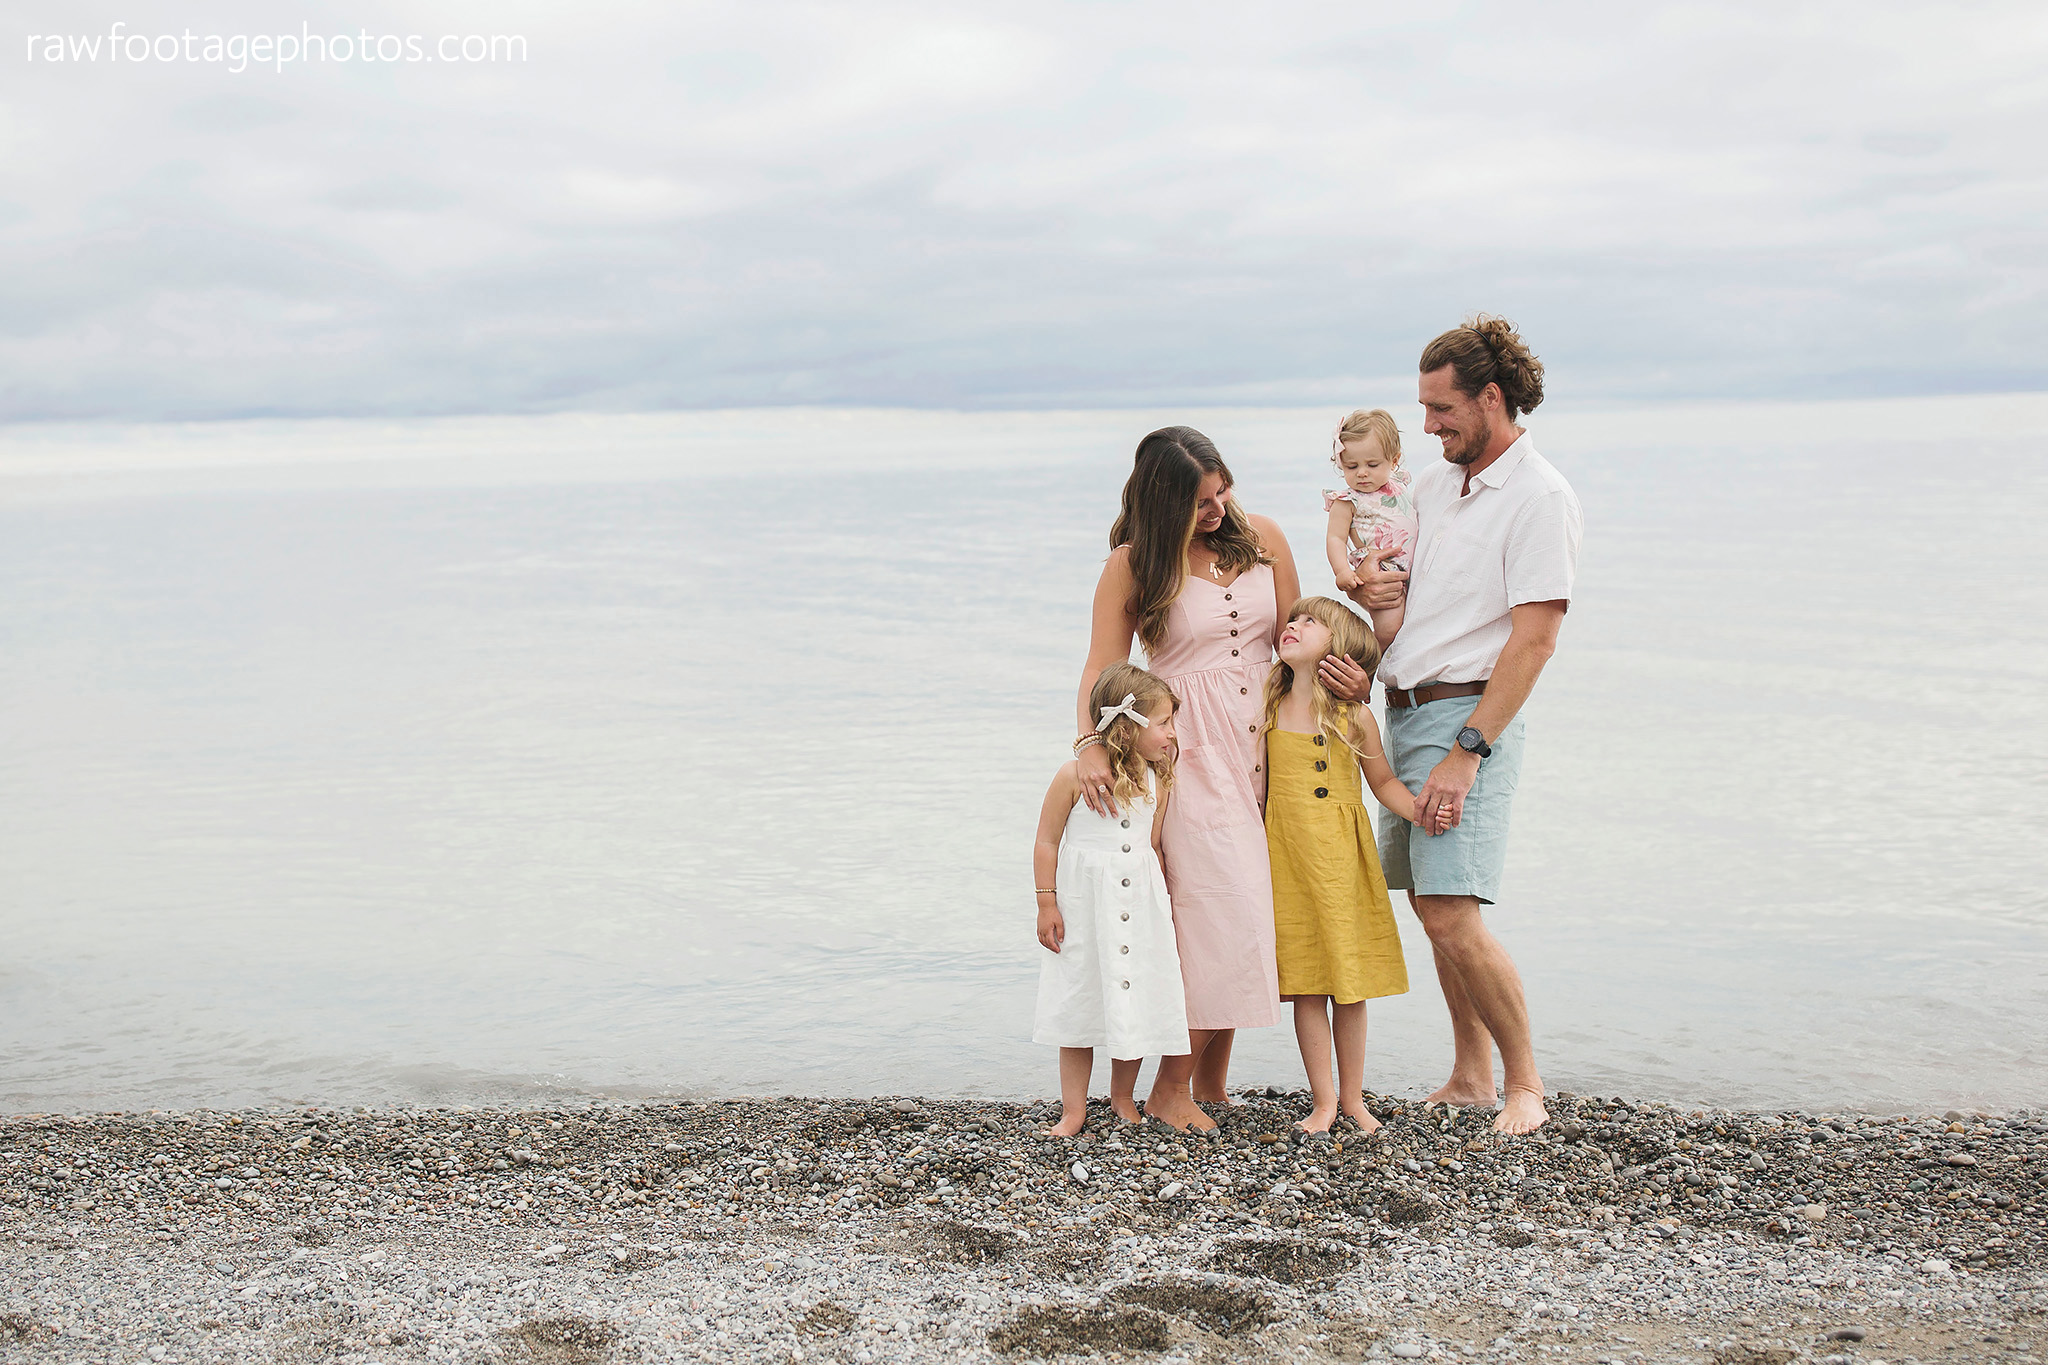 london_ontario_family_photography-lifestyle_photography-maternity_photos-raw_footage_photography-best_of_2018064.jpg